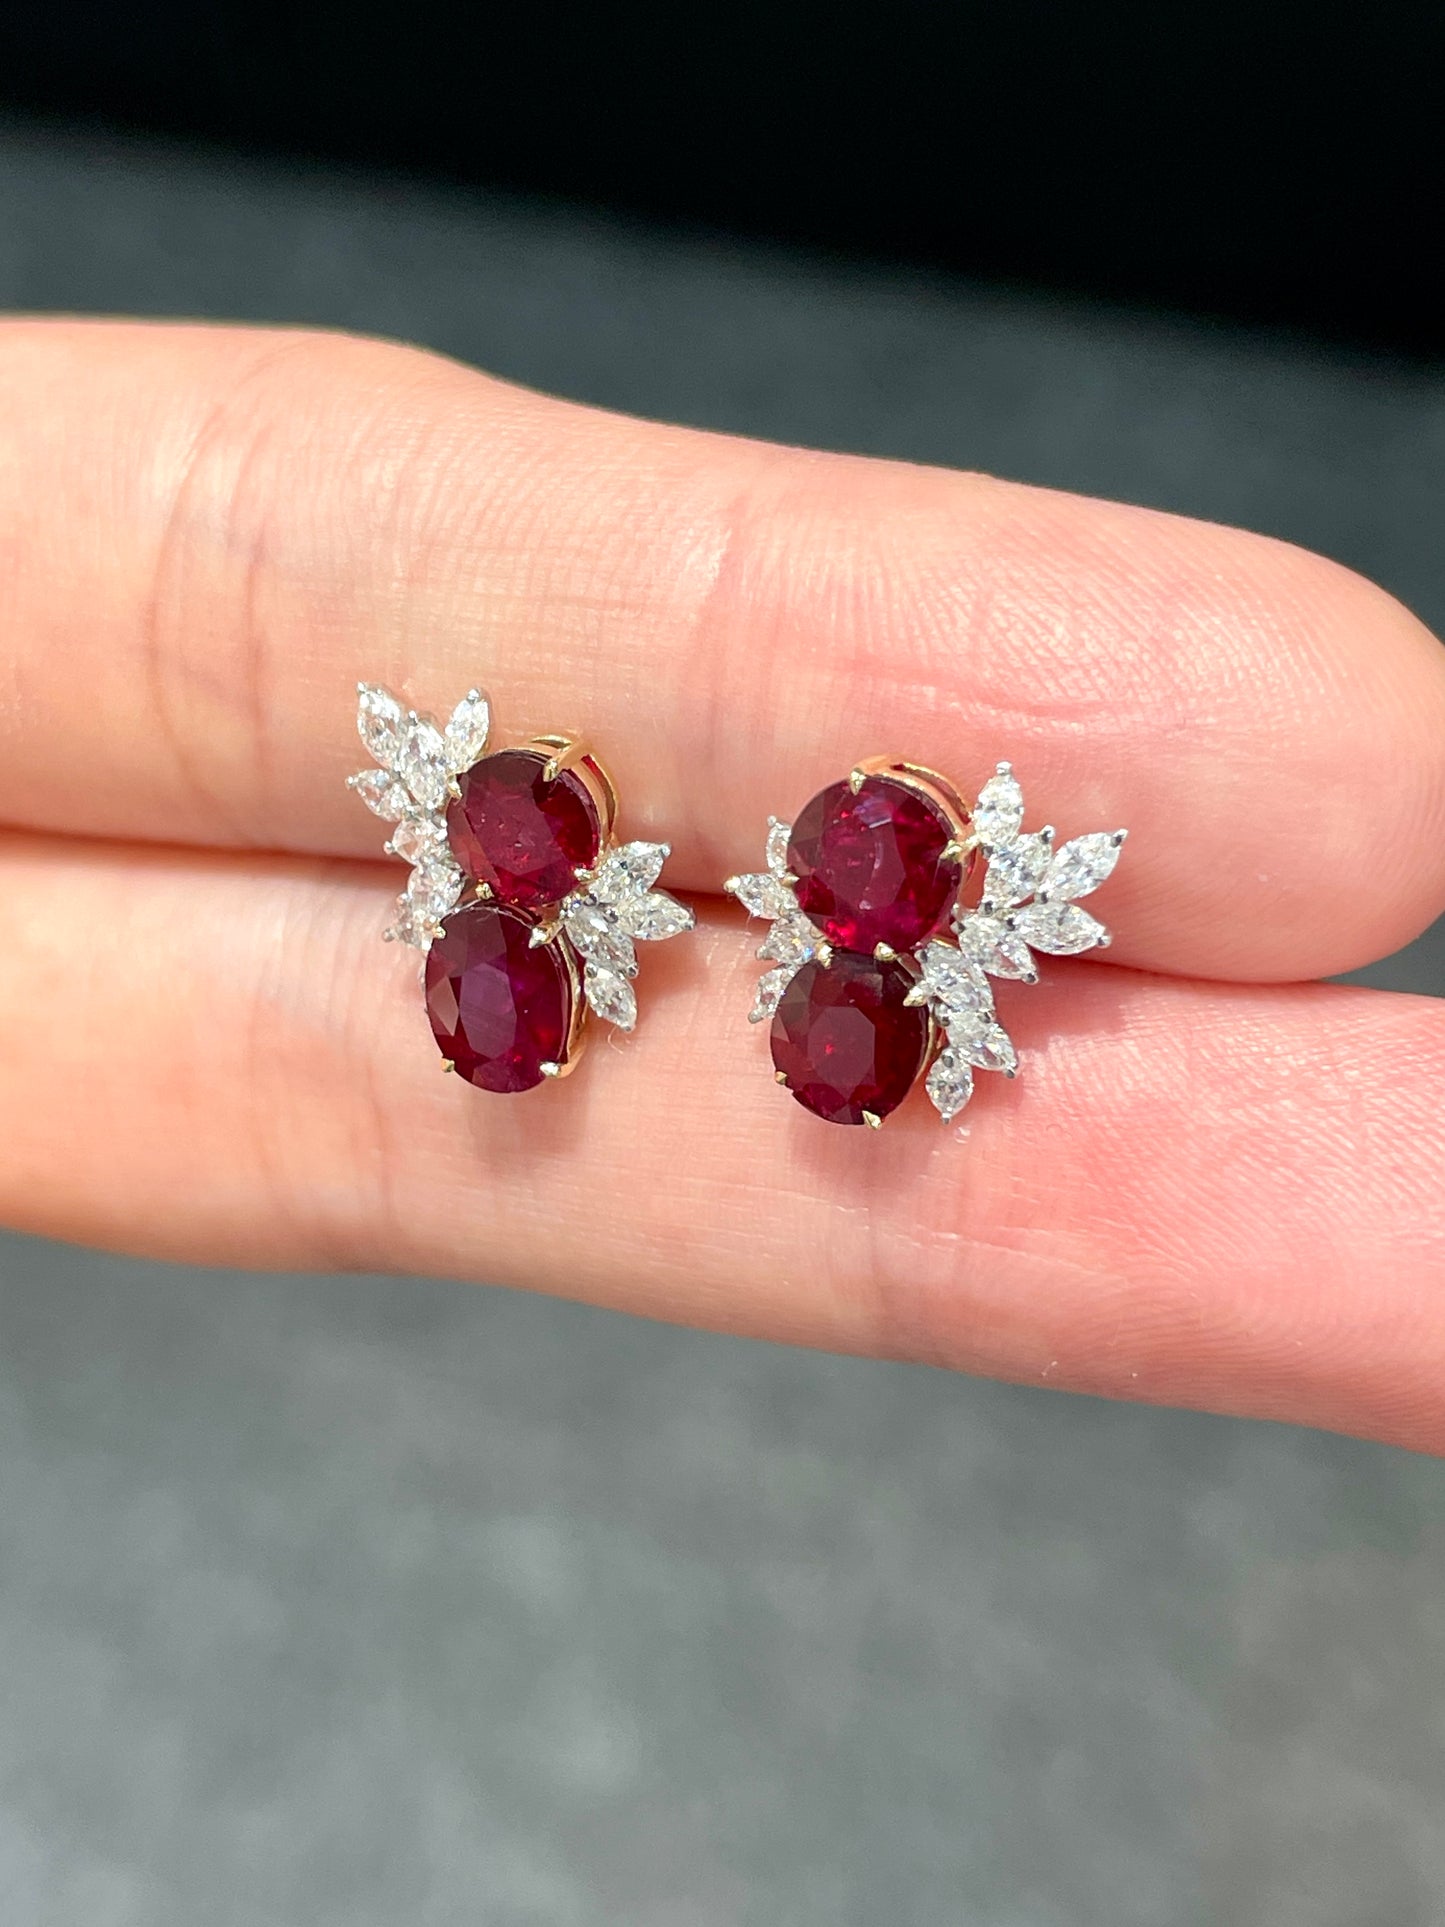 Natural Unheated Ruby 2.91 ct Earrings Set With Natural Diamonds 0.68ct In 18K White Gold Gemstone Fine Jewellery Singapore